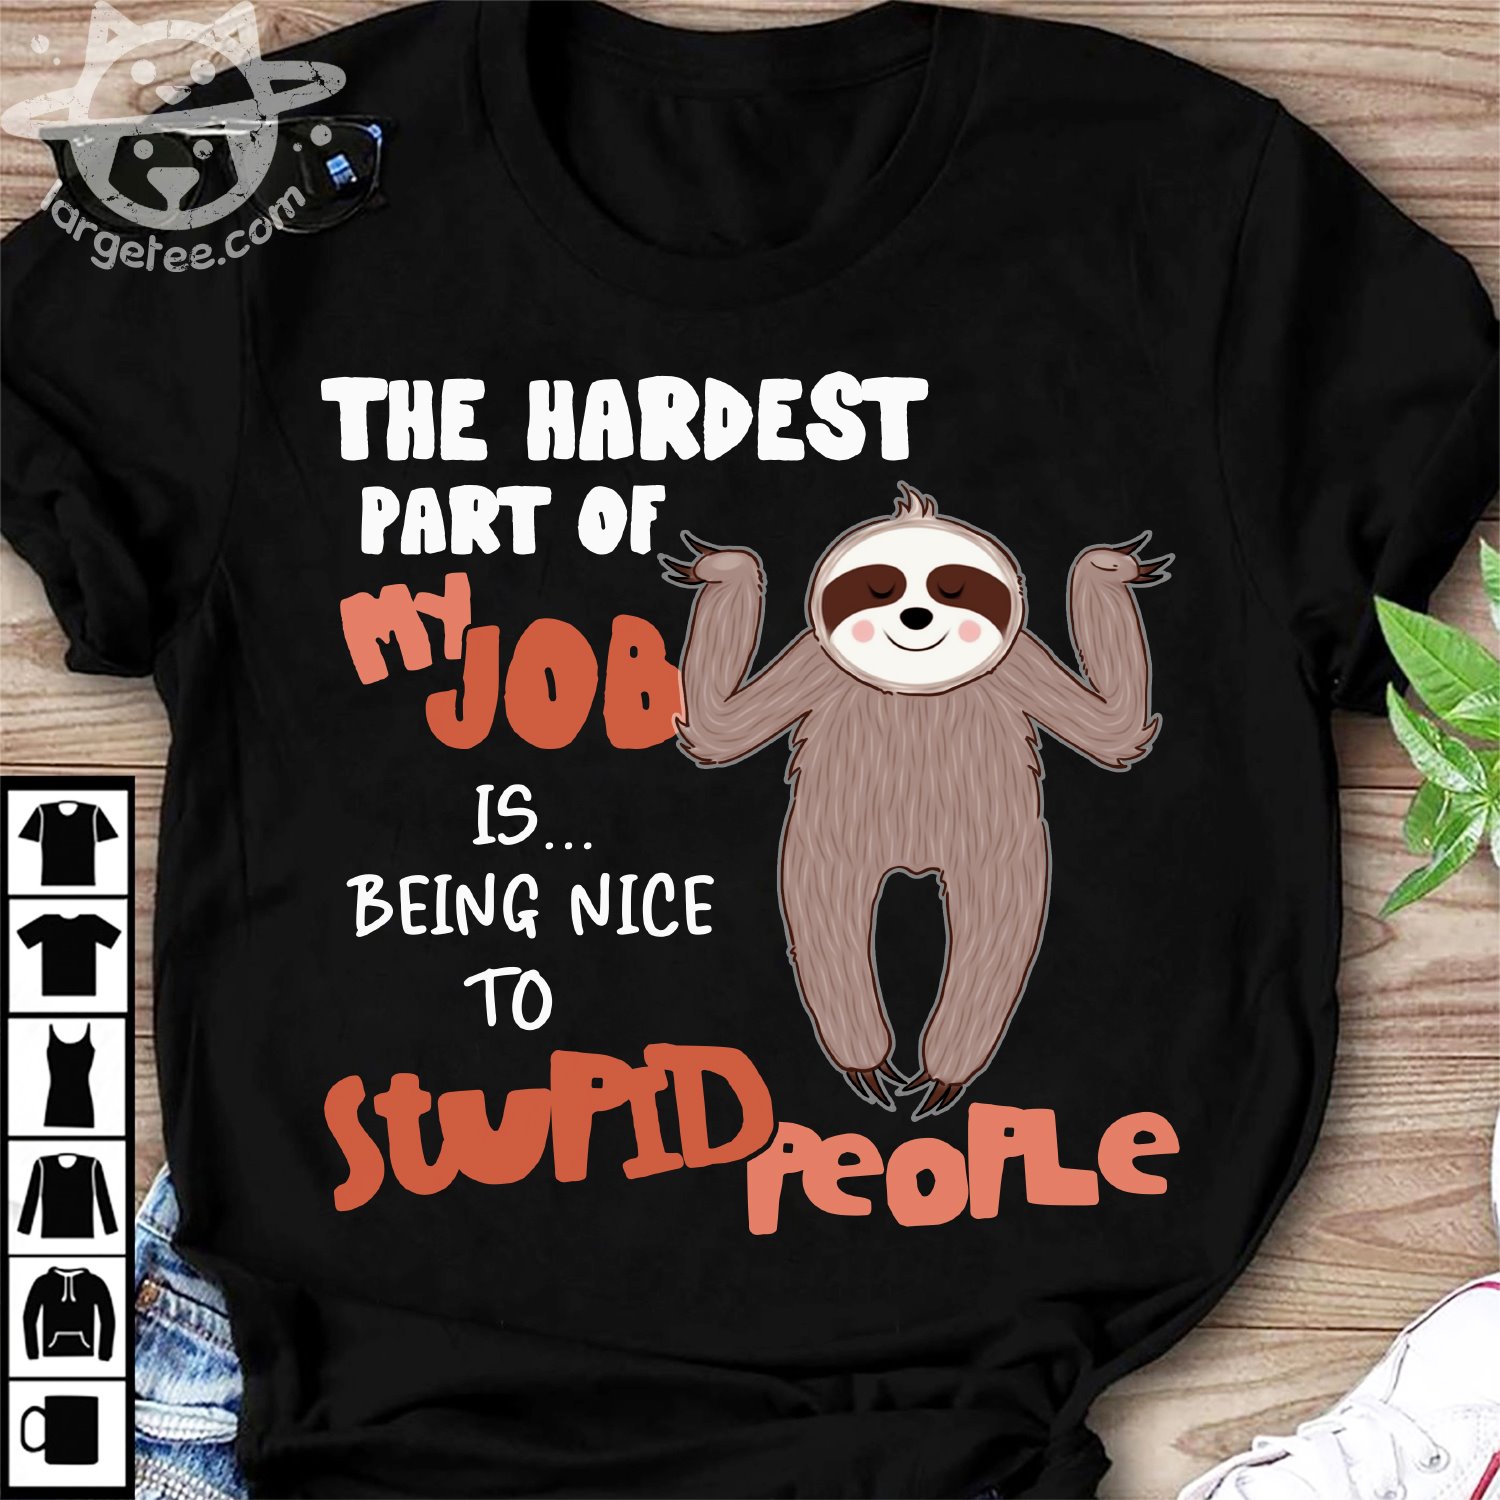 The hardest part of my job is being nice to stupid people - Grumpy sloth